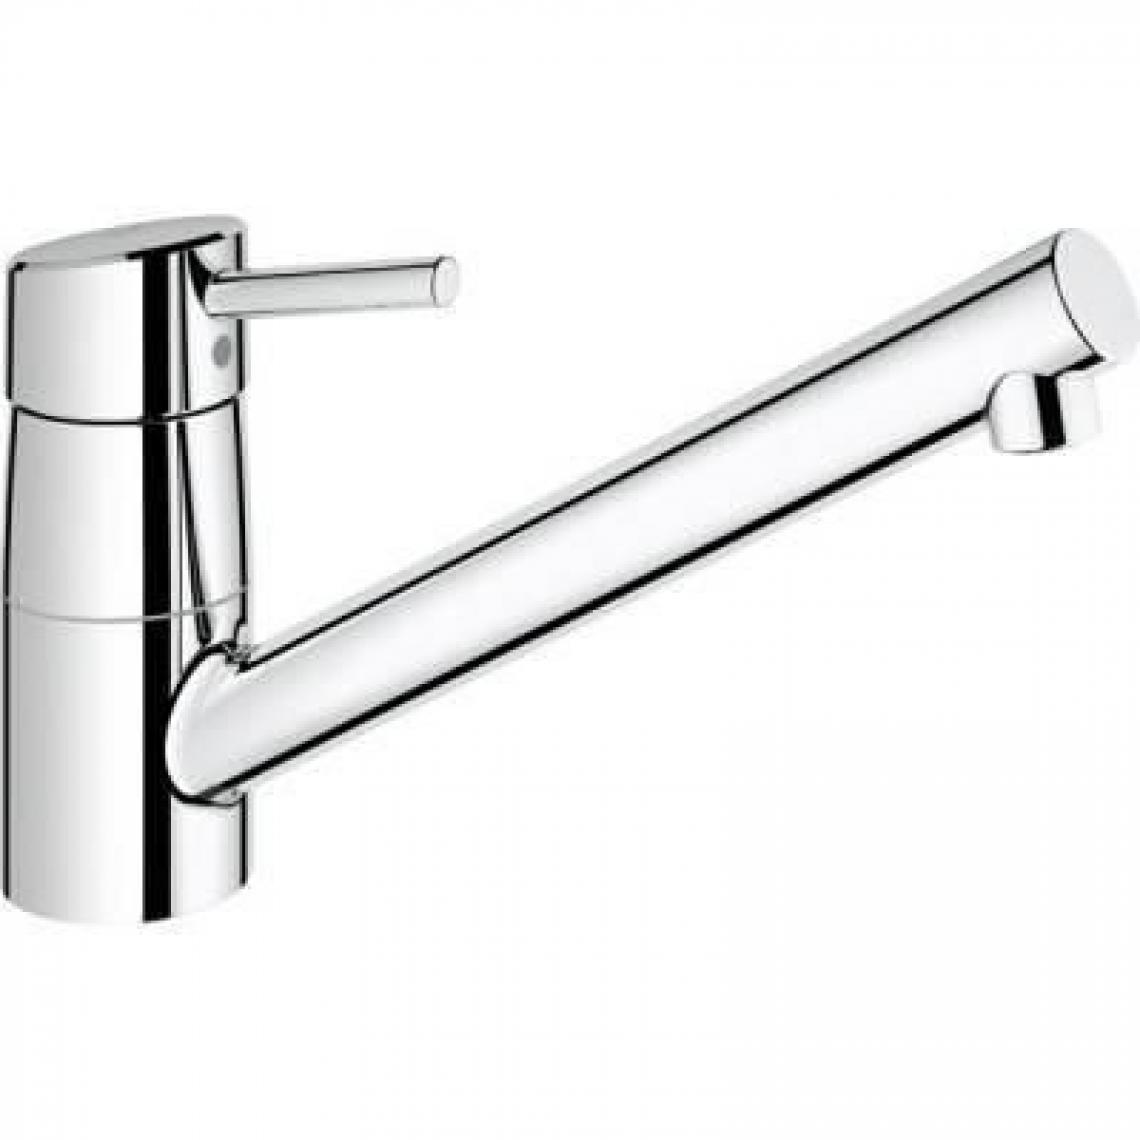 Grohe - GROHE Mitigeur evier Concetto 32660001 - Robinet d'évier